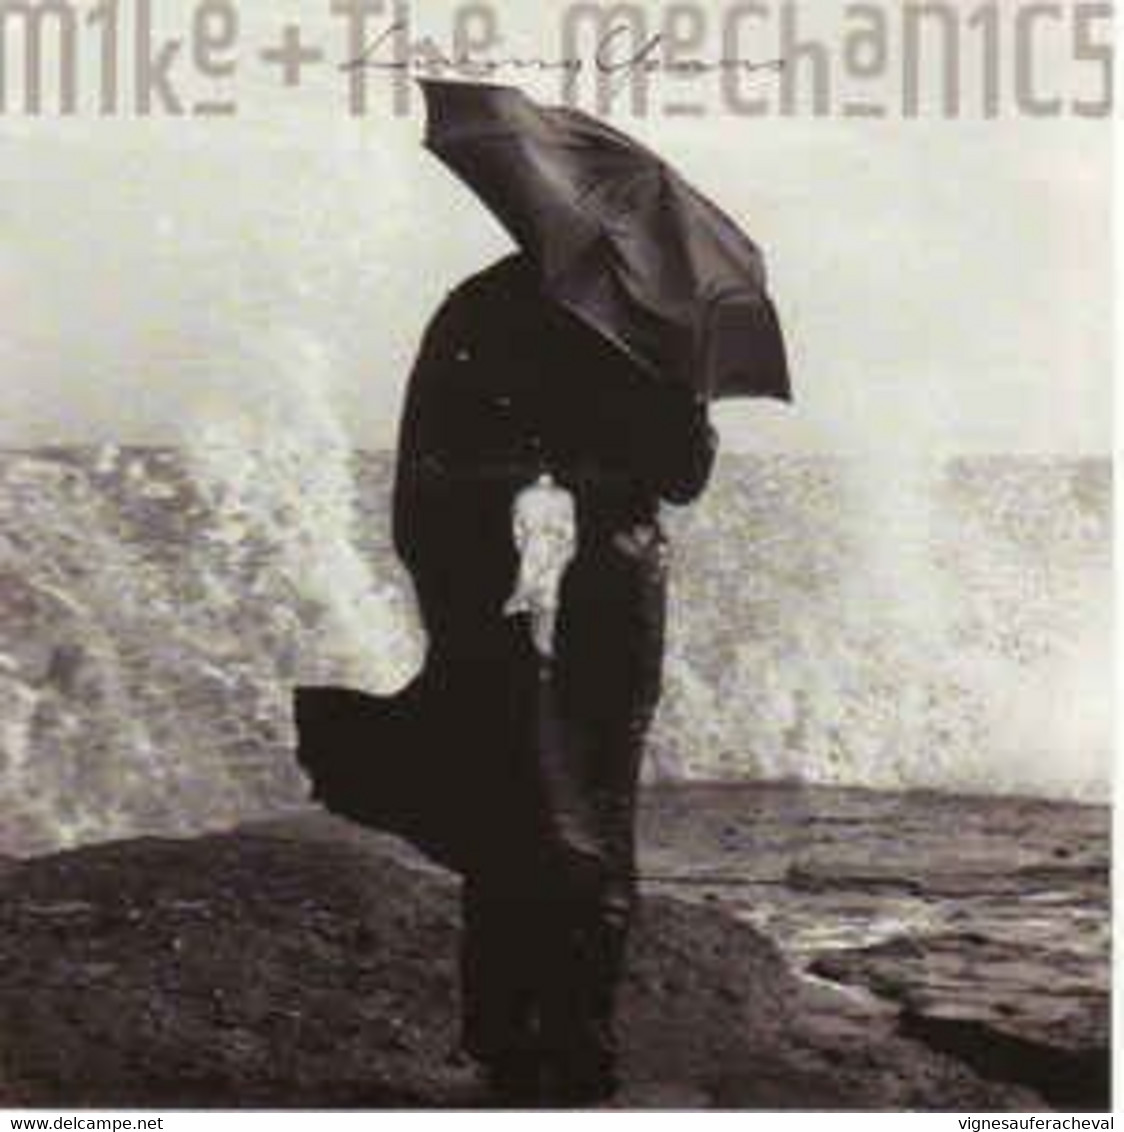 Mike & The Mechanics- Living Years - Andere - Engelstalig